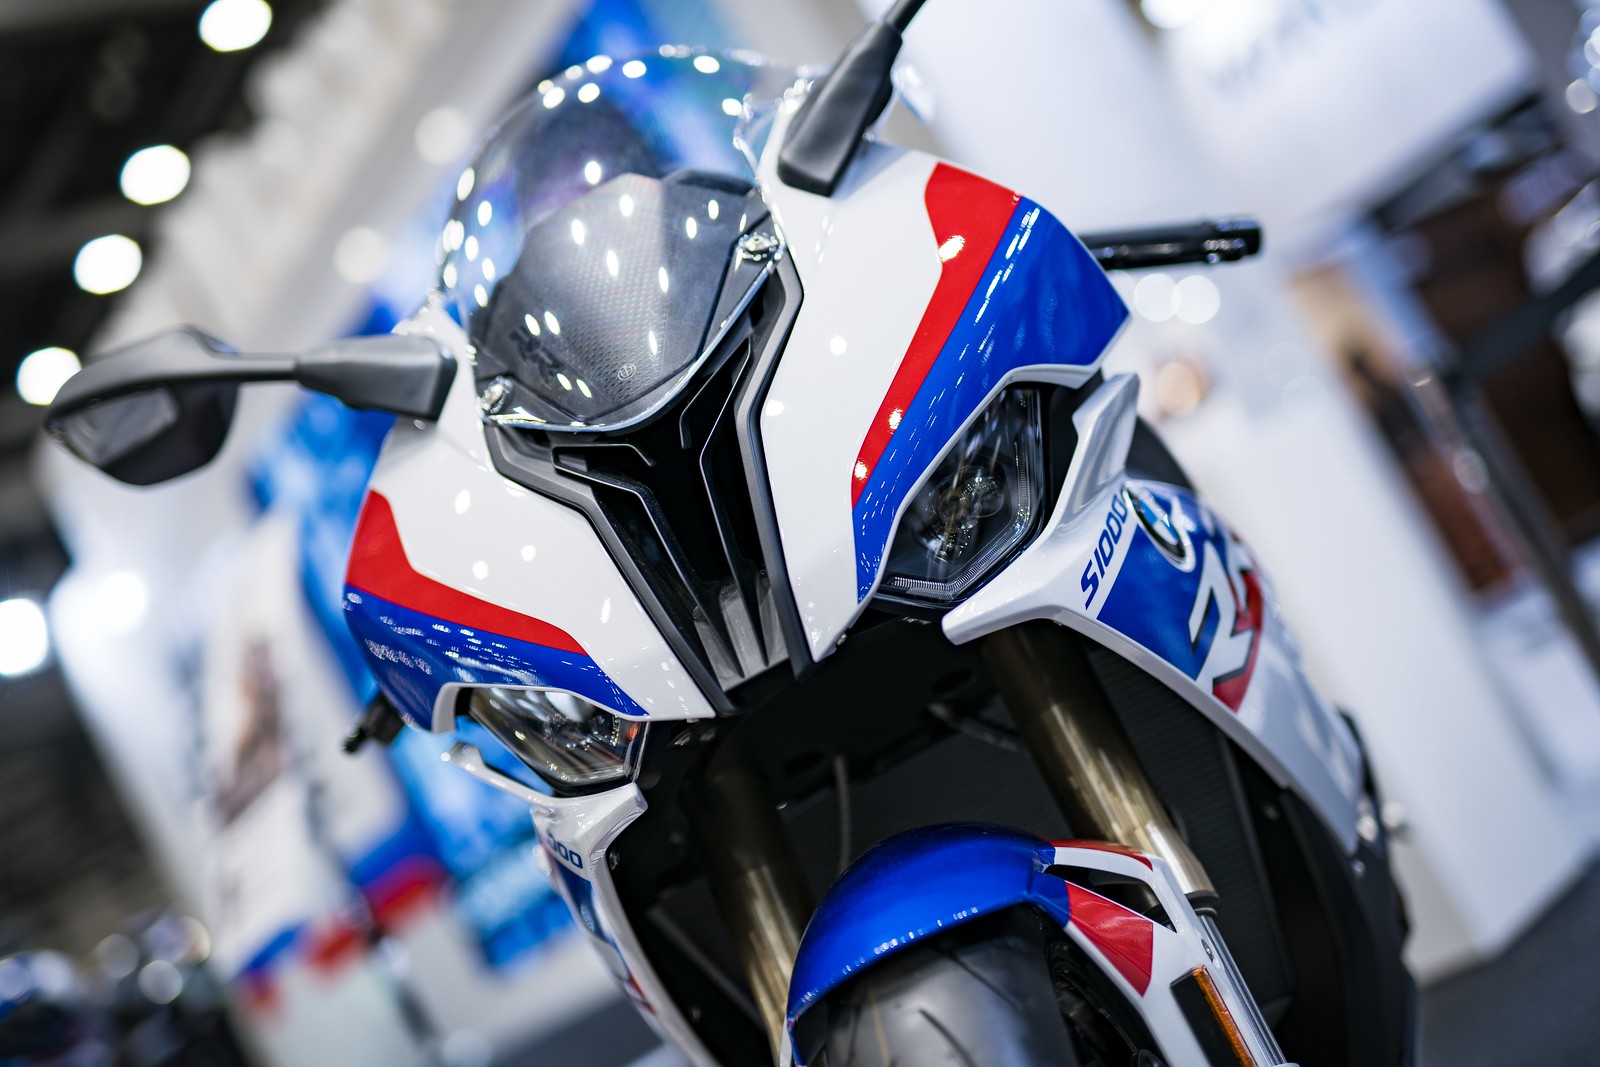 BMW S1000RR 2019 - Tokyo MotorCycle Show